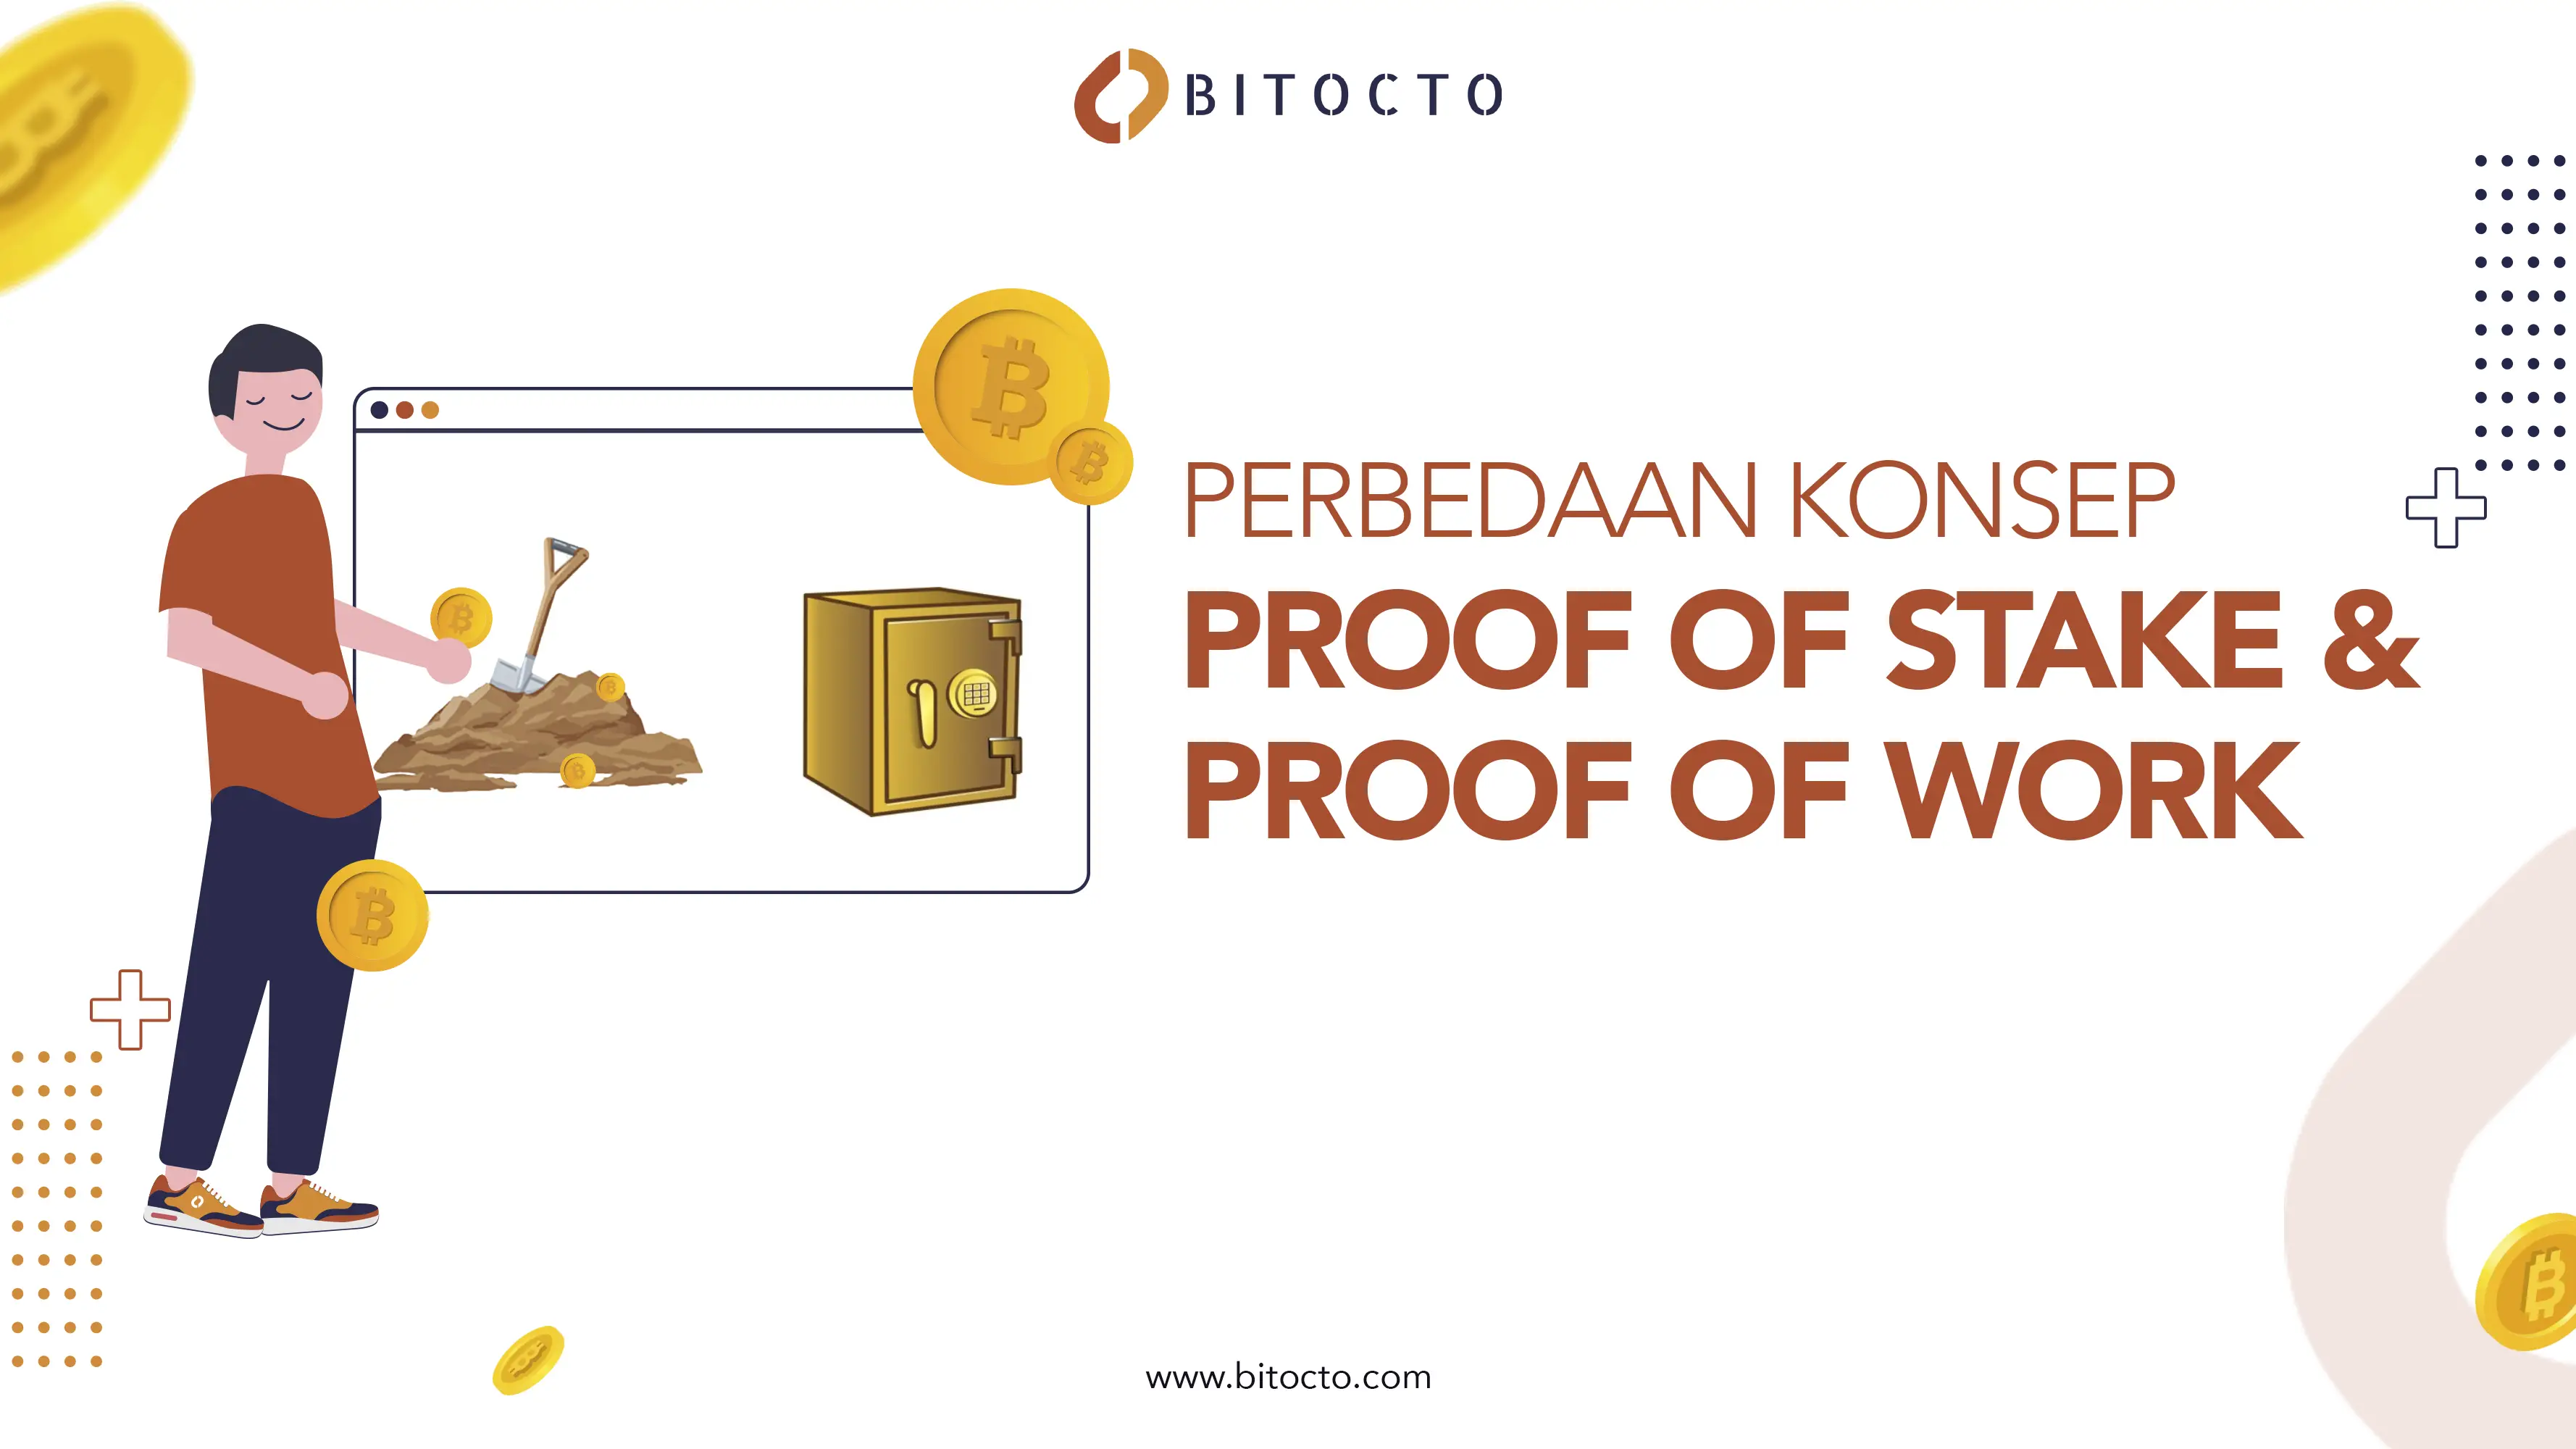 Bitcoin hard fork proof of stake